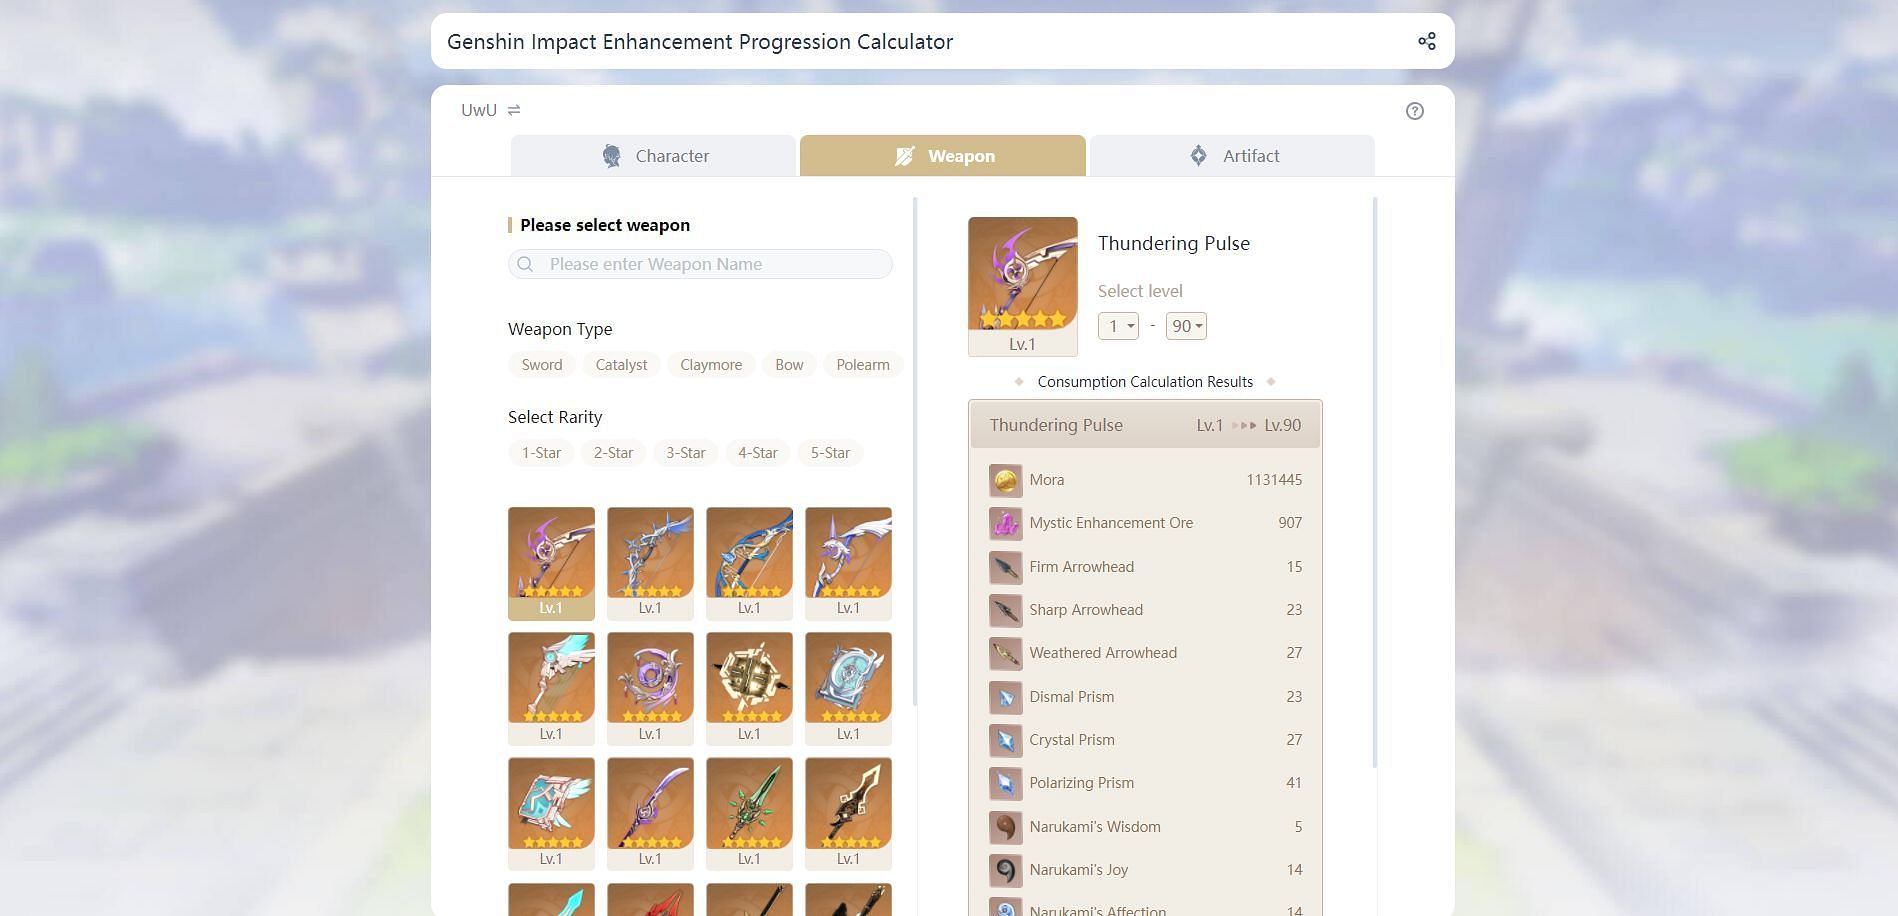 First look of Weapon section in Enhancement Progression Calculator (Image via Genshin Impact)